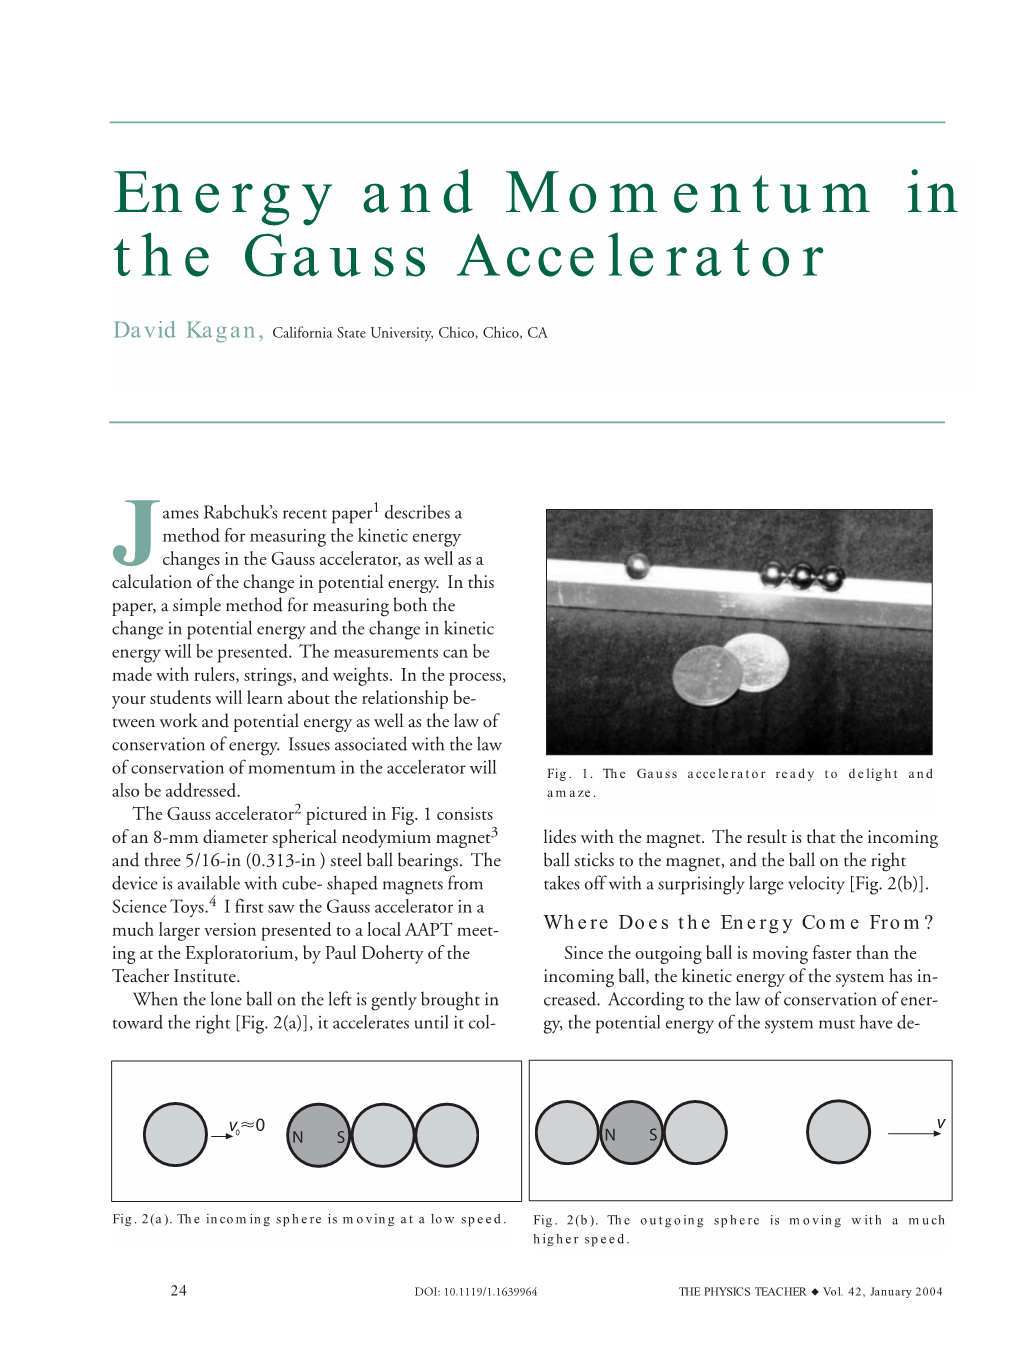 Energy and Momentum in the Gauss Accelerator